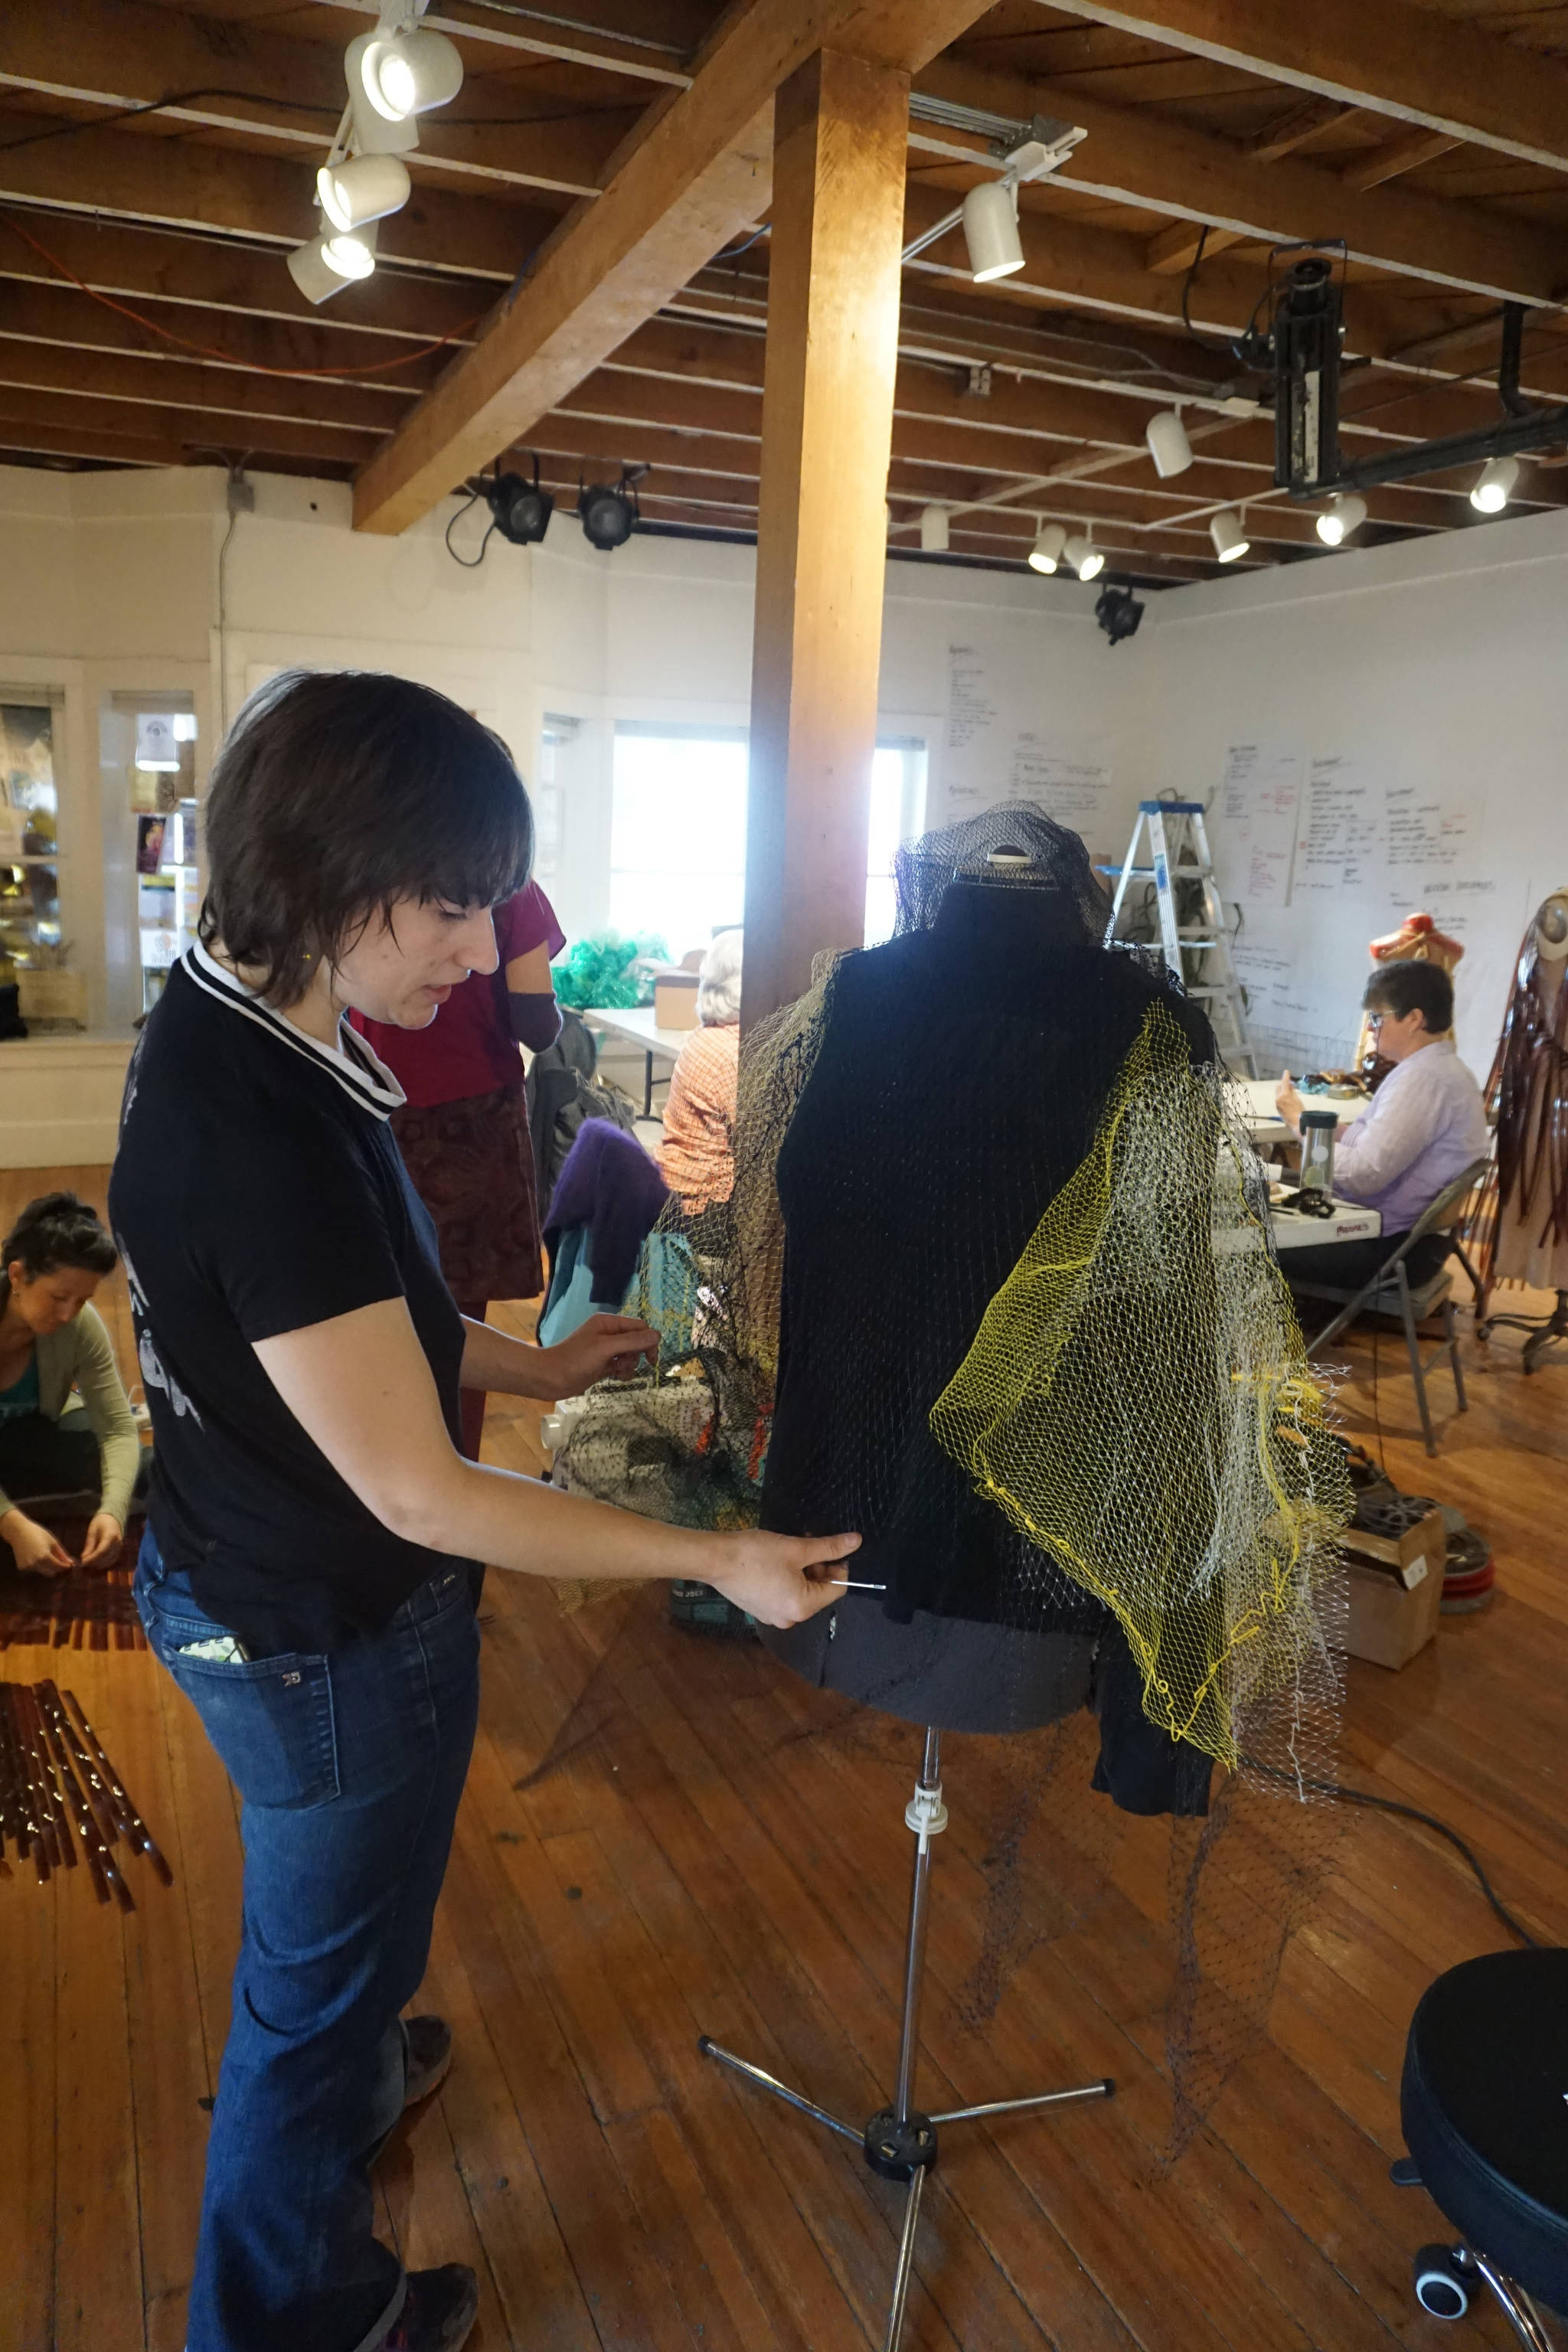 Mallory Drover works on a Wearable Arts piece Saturday, Oct. 14, 2017 at a workshop with Sheila Wyne at the Bunnell Street Arts Center in Homer, Alaska. Wyne is artist in residence at Bunnell. The residecy is sponsored by the Homer Fiber Arts Collective. Drover is a Homer student and a visual arts major attending Antioch College, Yellow Springs, Ohio. She took Wyne’s workshop as part of work study at Antioch. (Photo by Michael Armstrong)